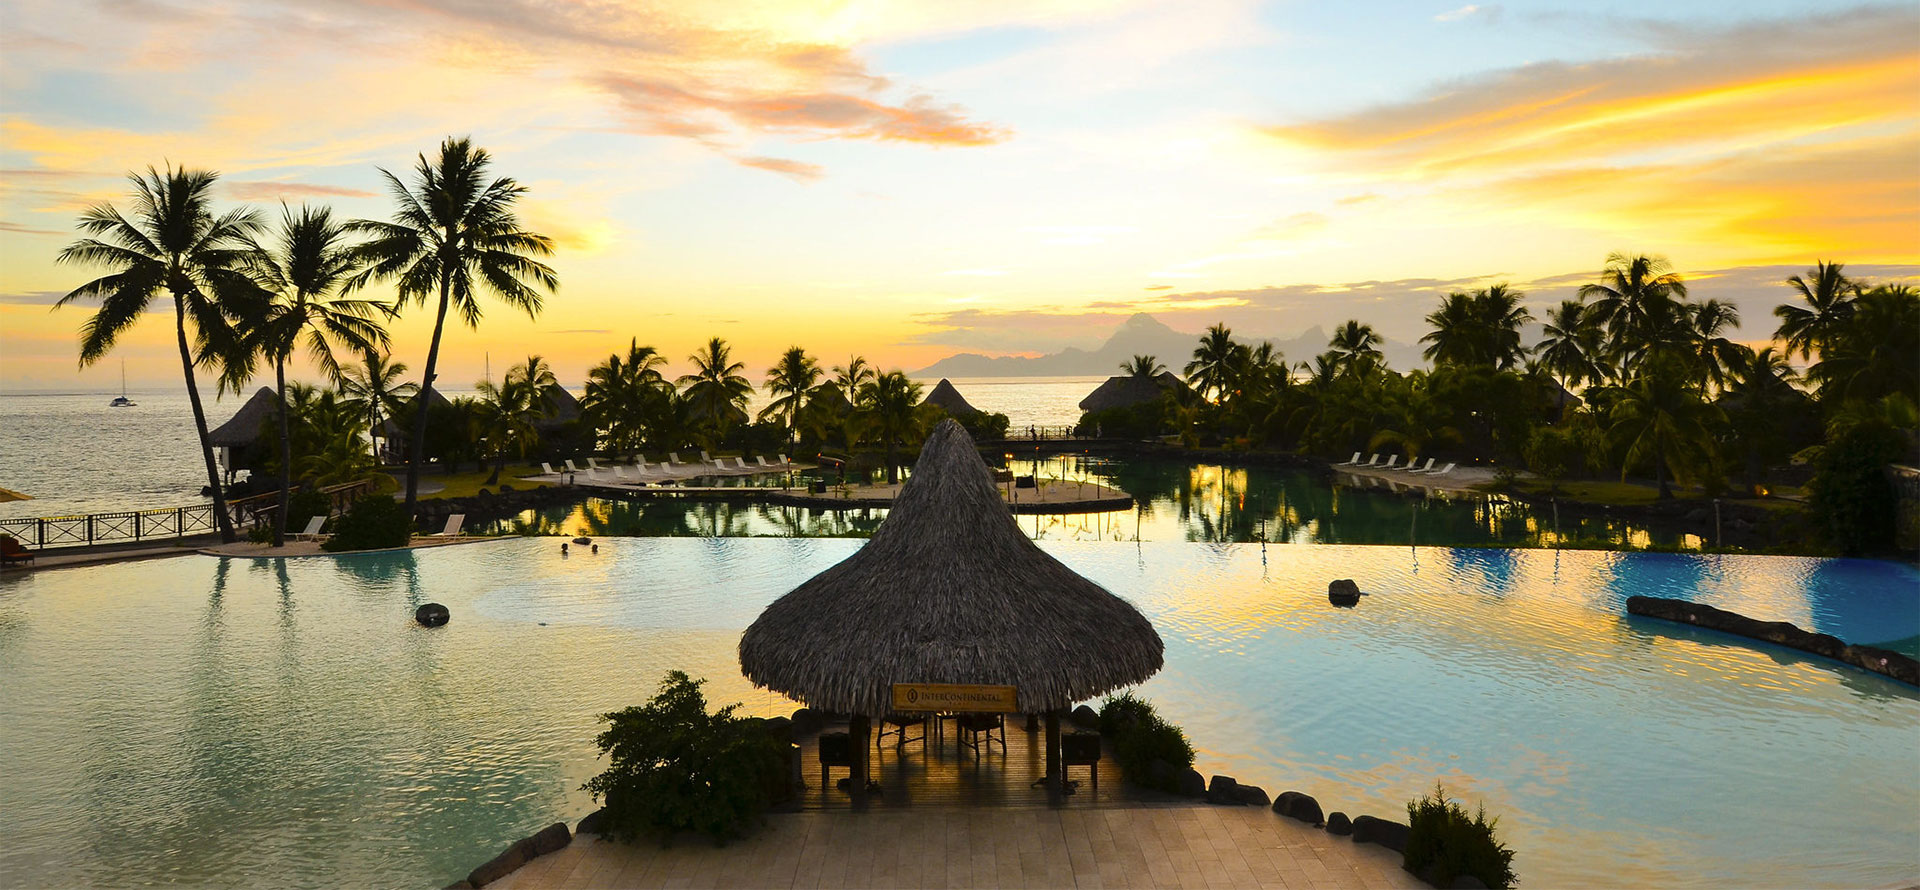 Sunset in Tahiti all-inclusive adults only resort.